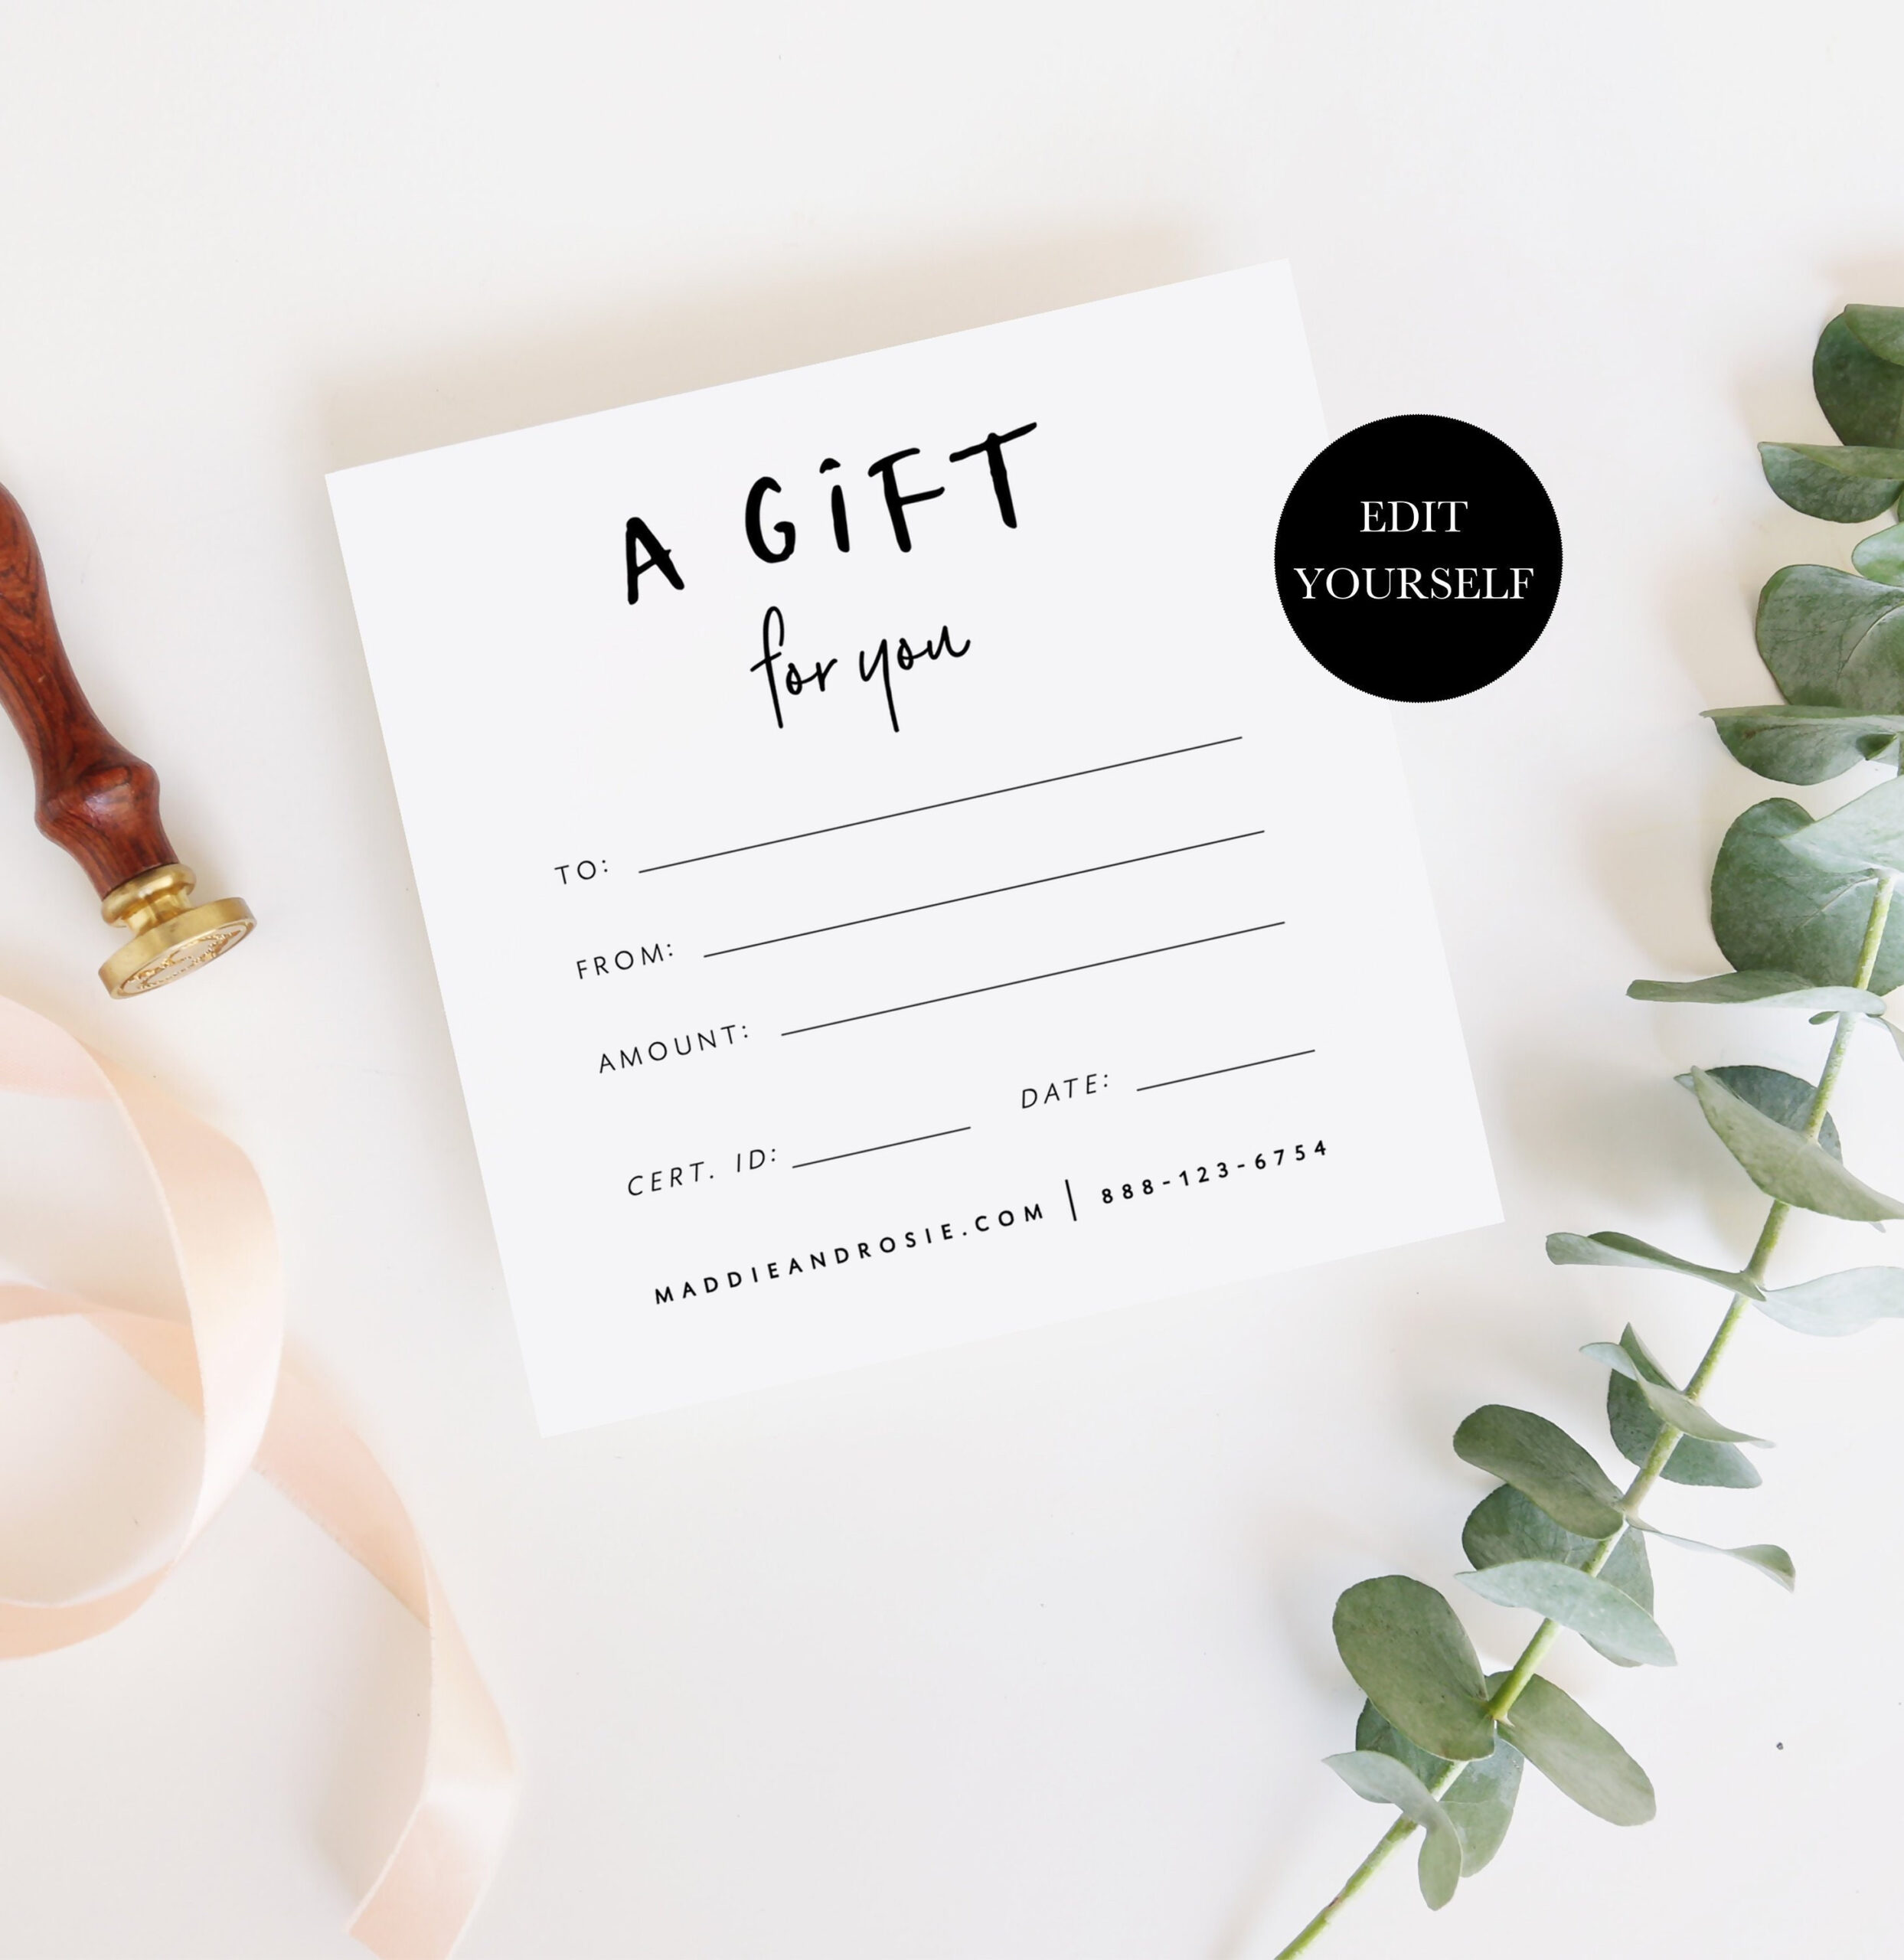 Gift Voucher Template Printable Voucher Download Editable - Etsy  With Homemade Gift Certificate Template